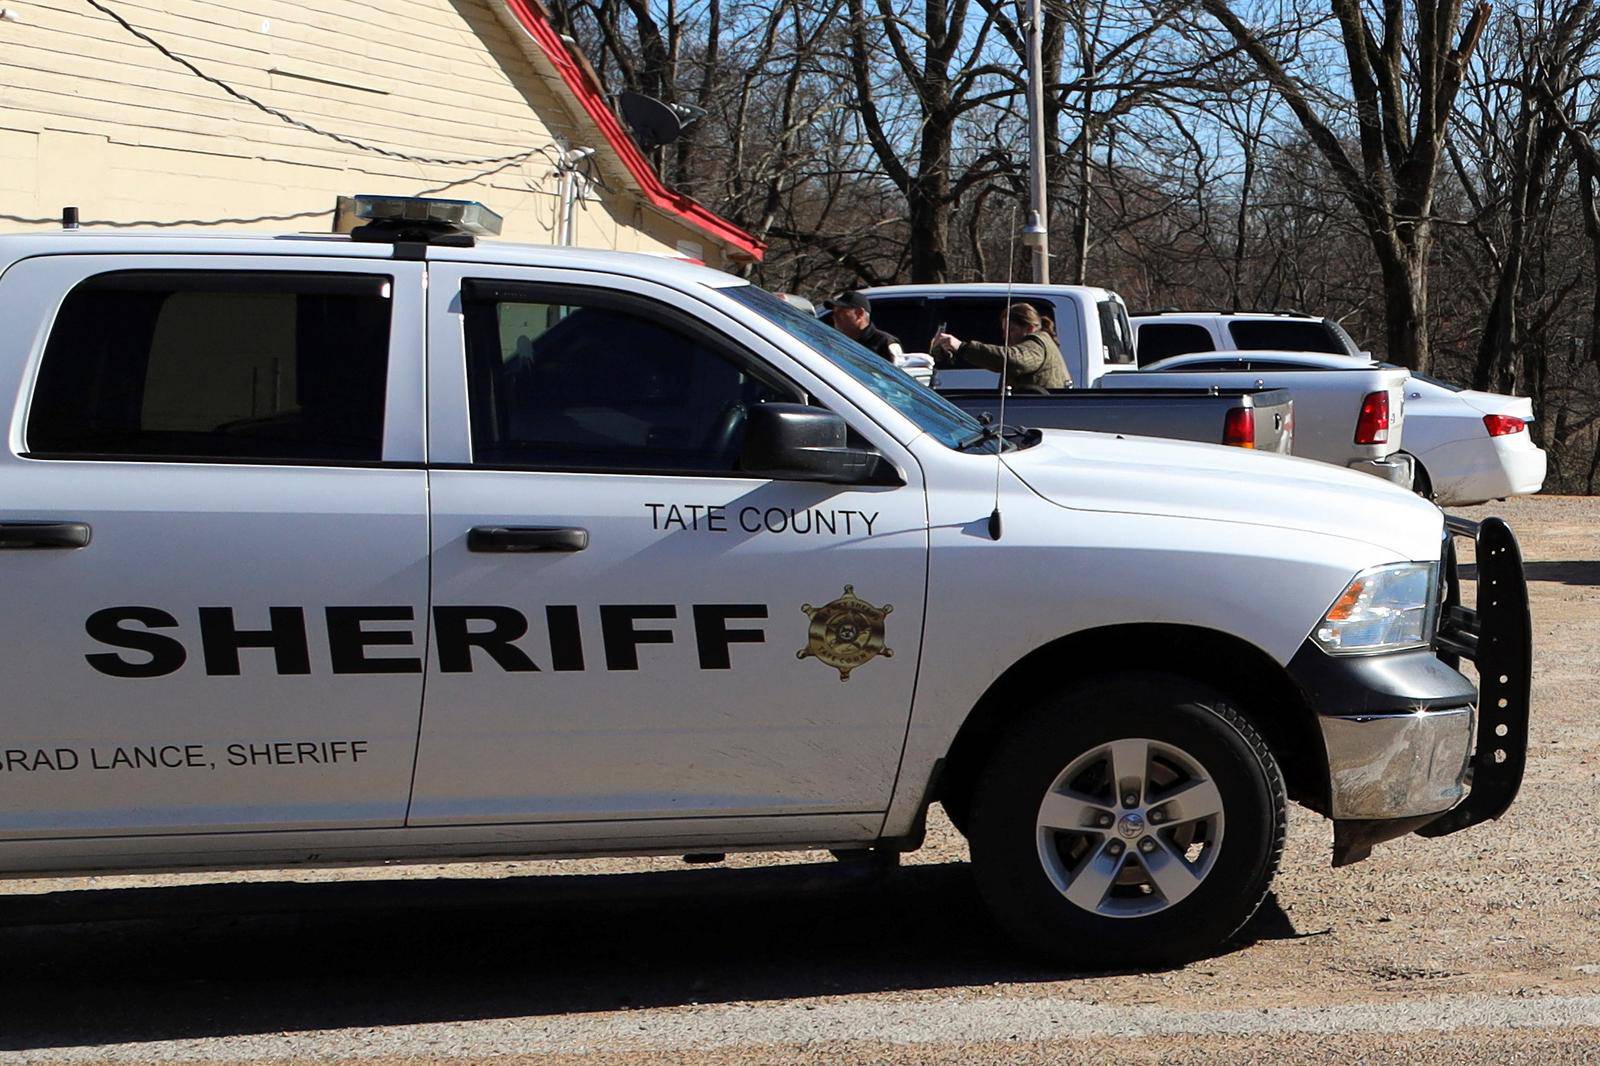 A vehicle of the Tate County Sheriff is seen parked outside a gas station convenience store after a shooting, in Arkabutla